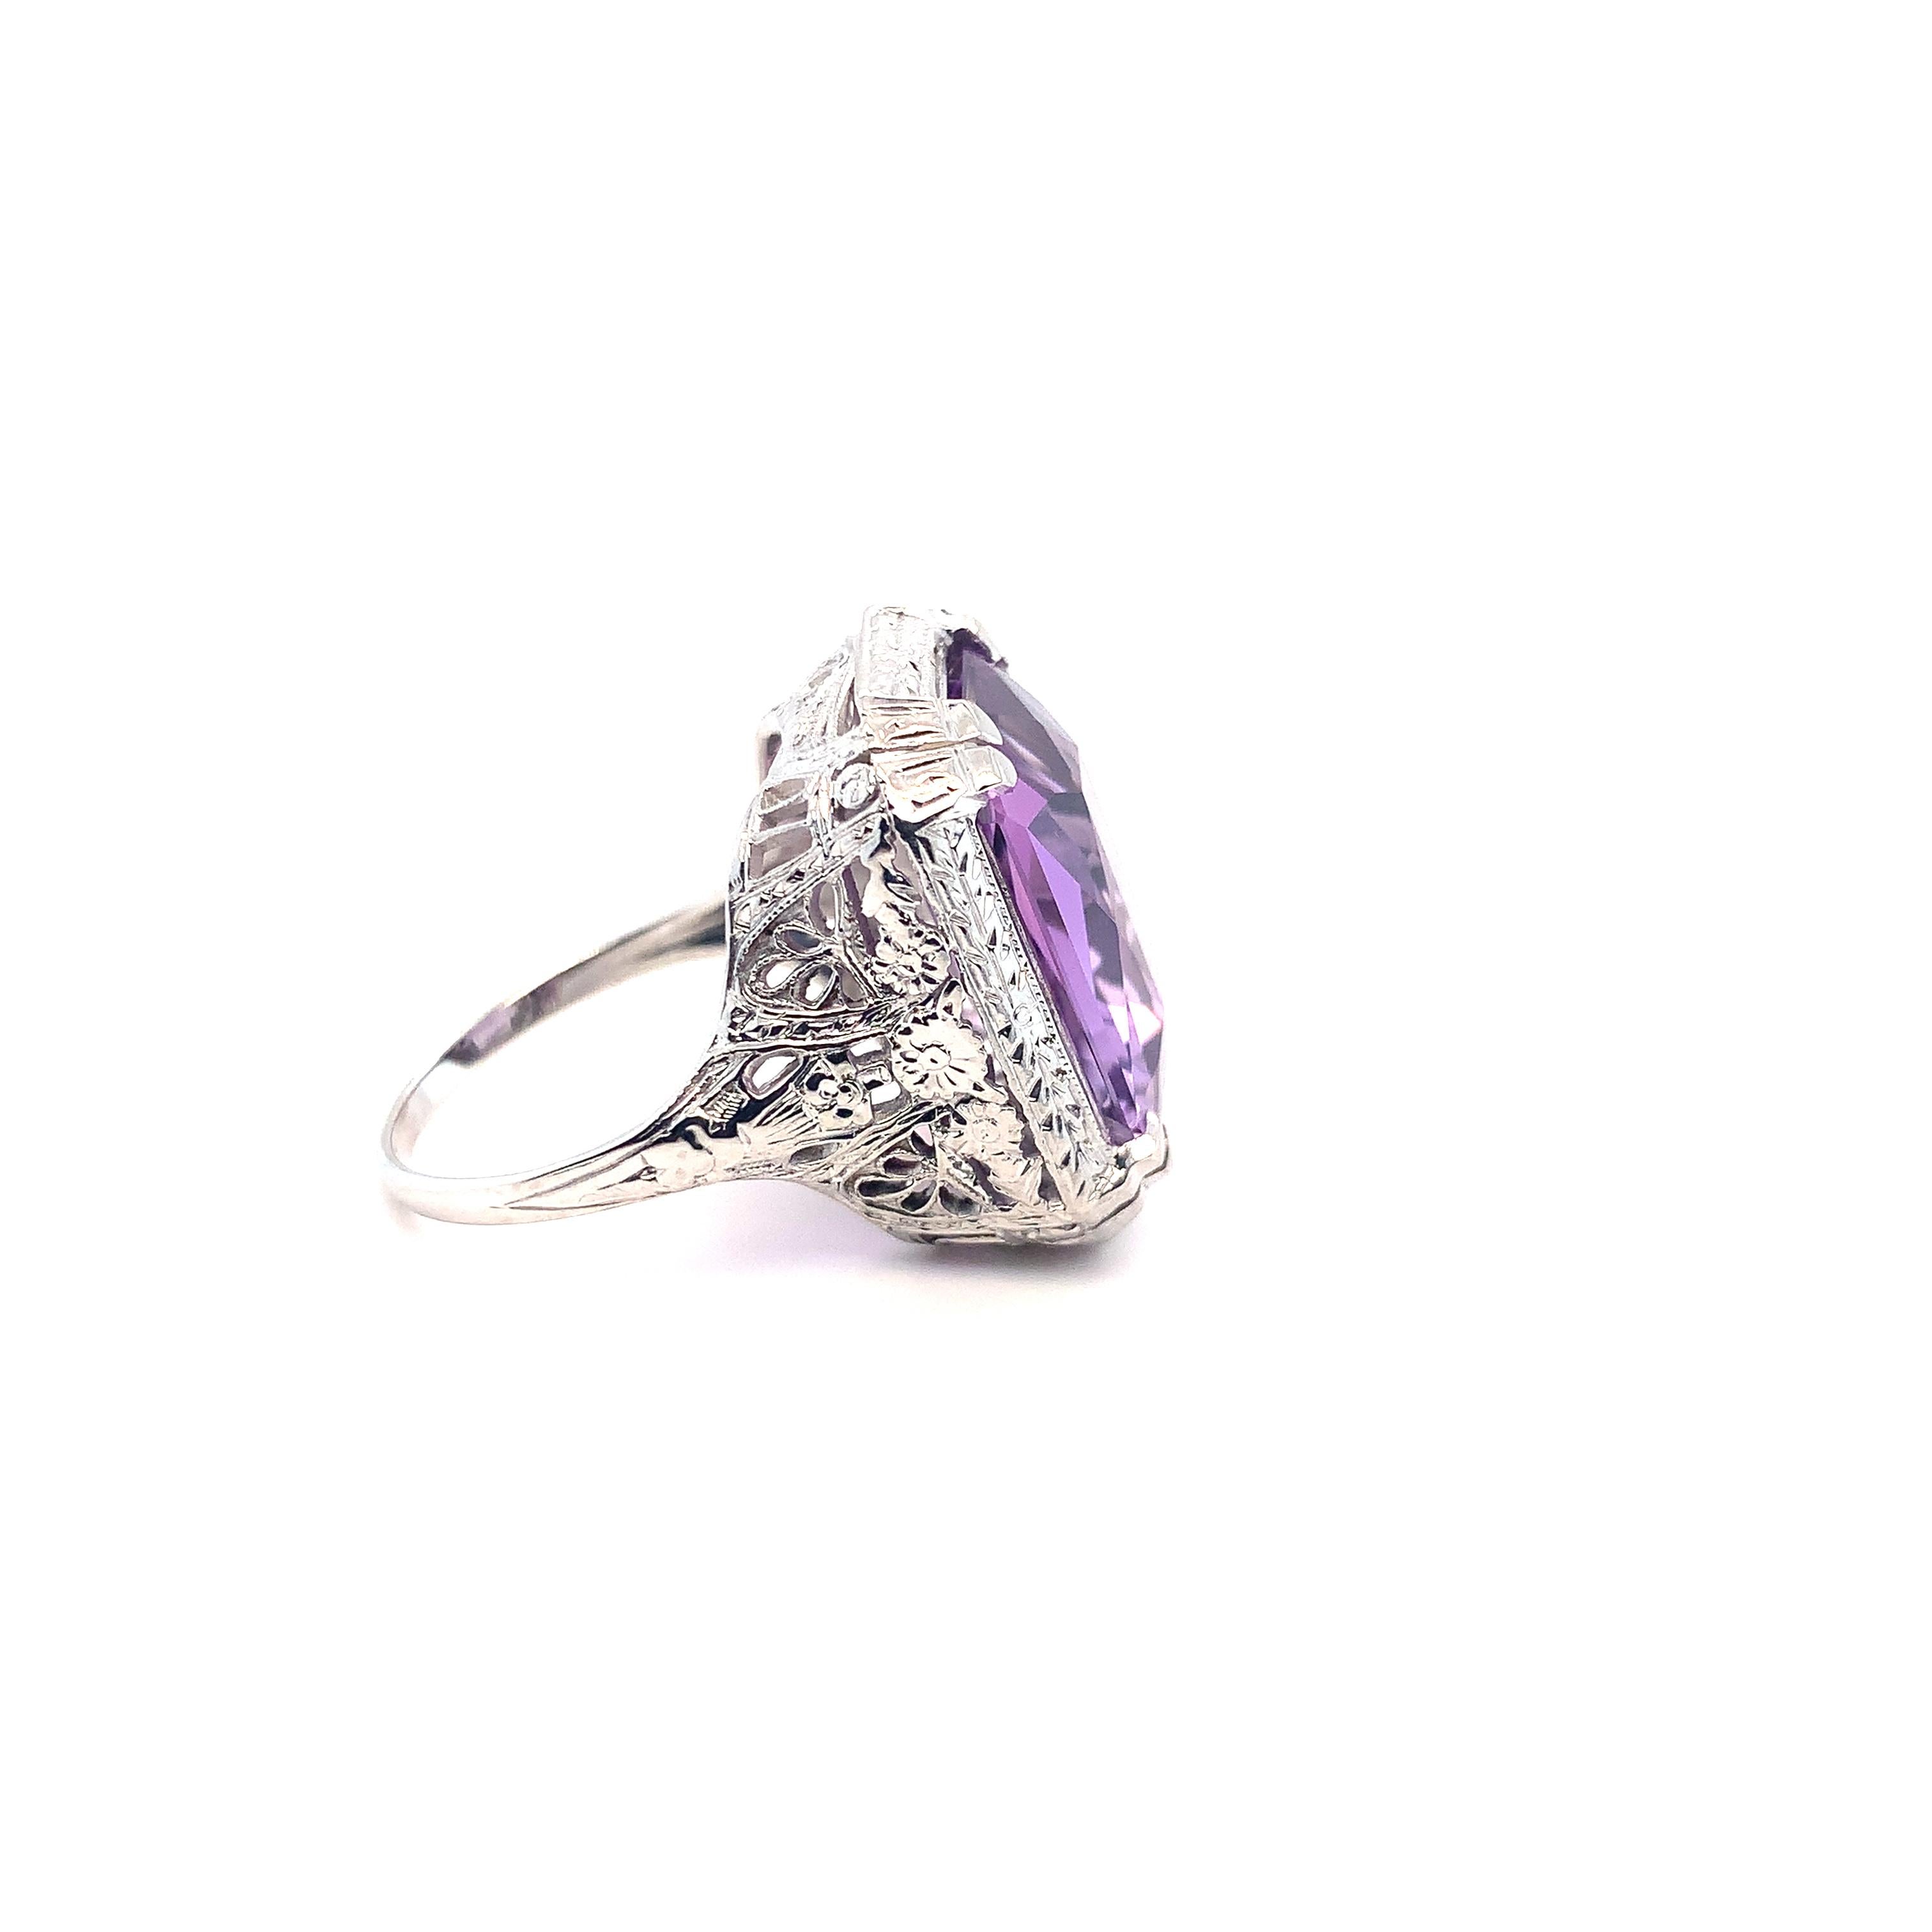 18K Filigree Art Deco Large 9 Carat Amethyst Ring In Excellent Condition For Sale In Big Bend, WI